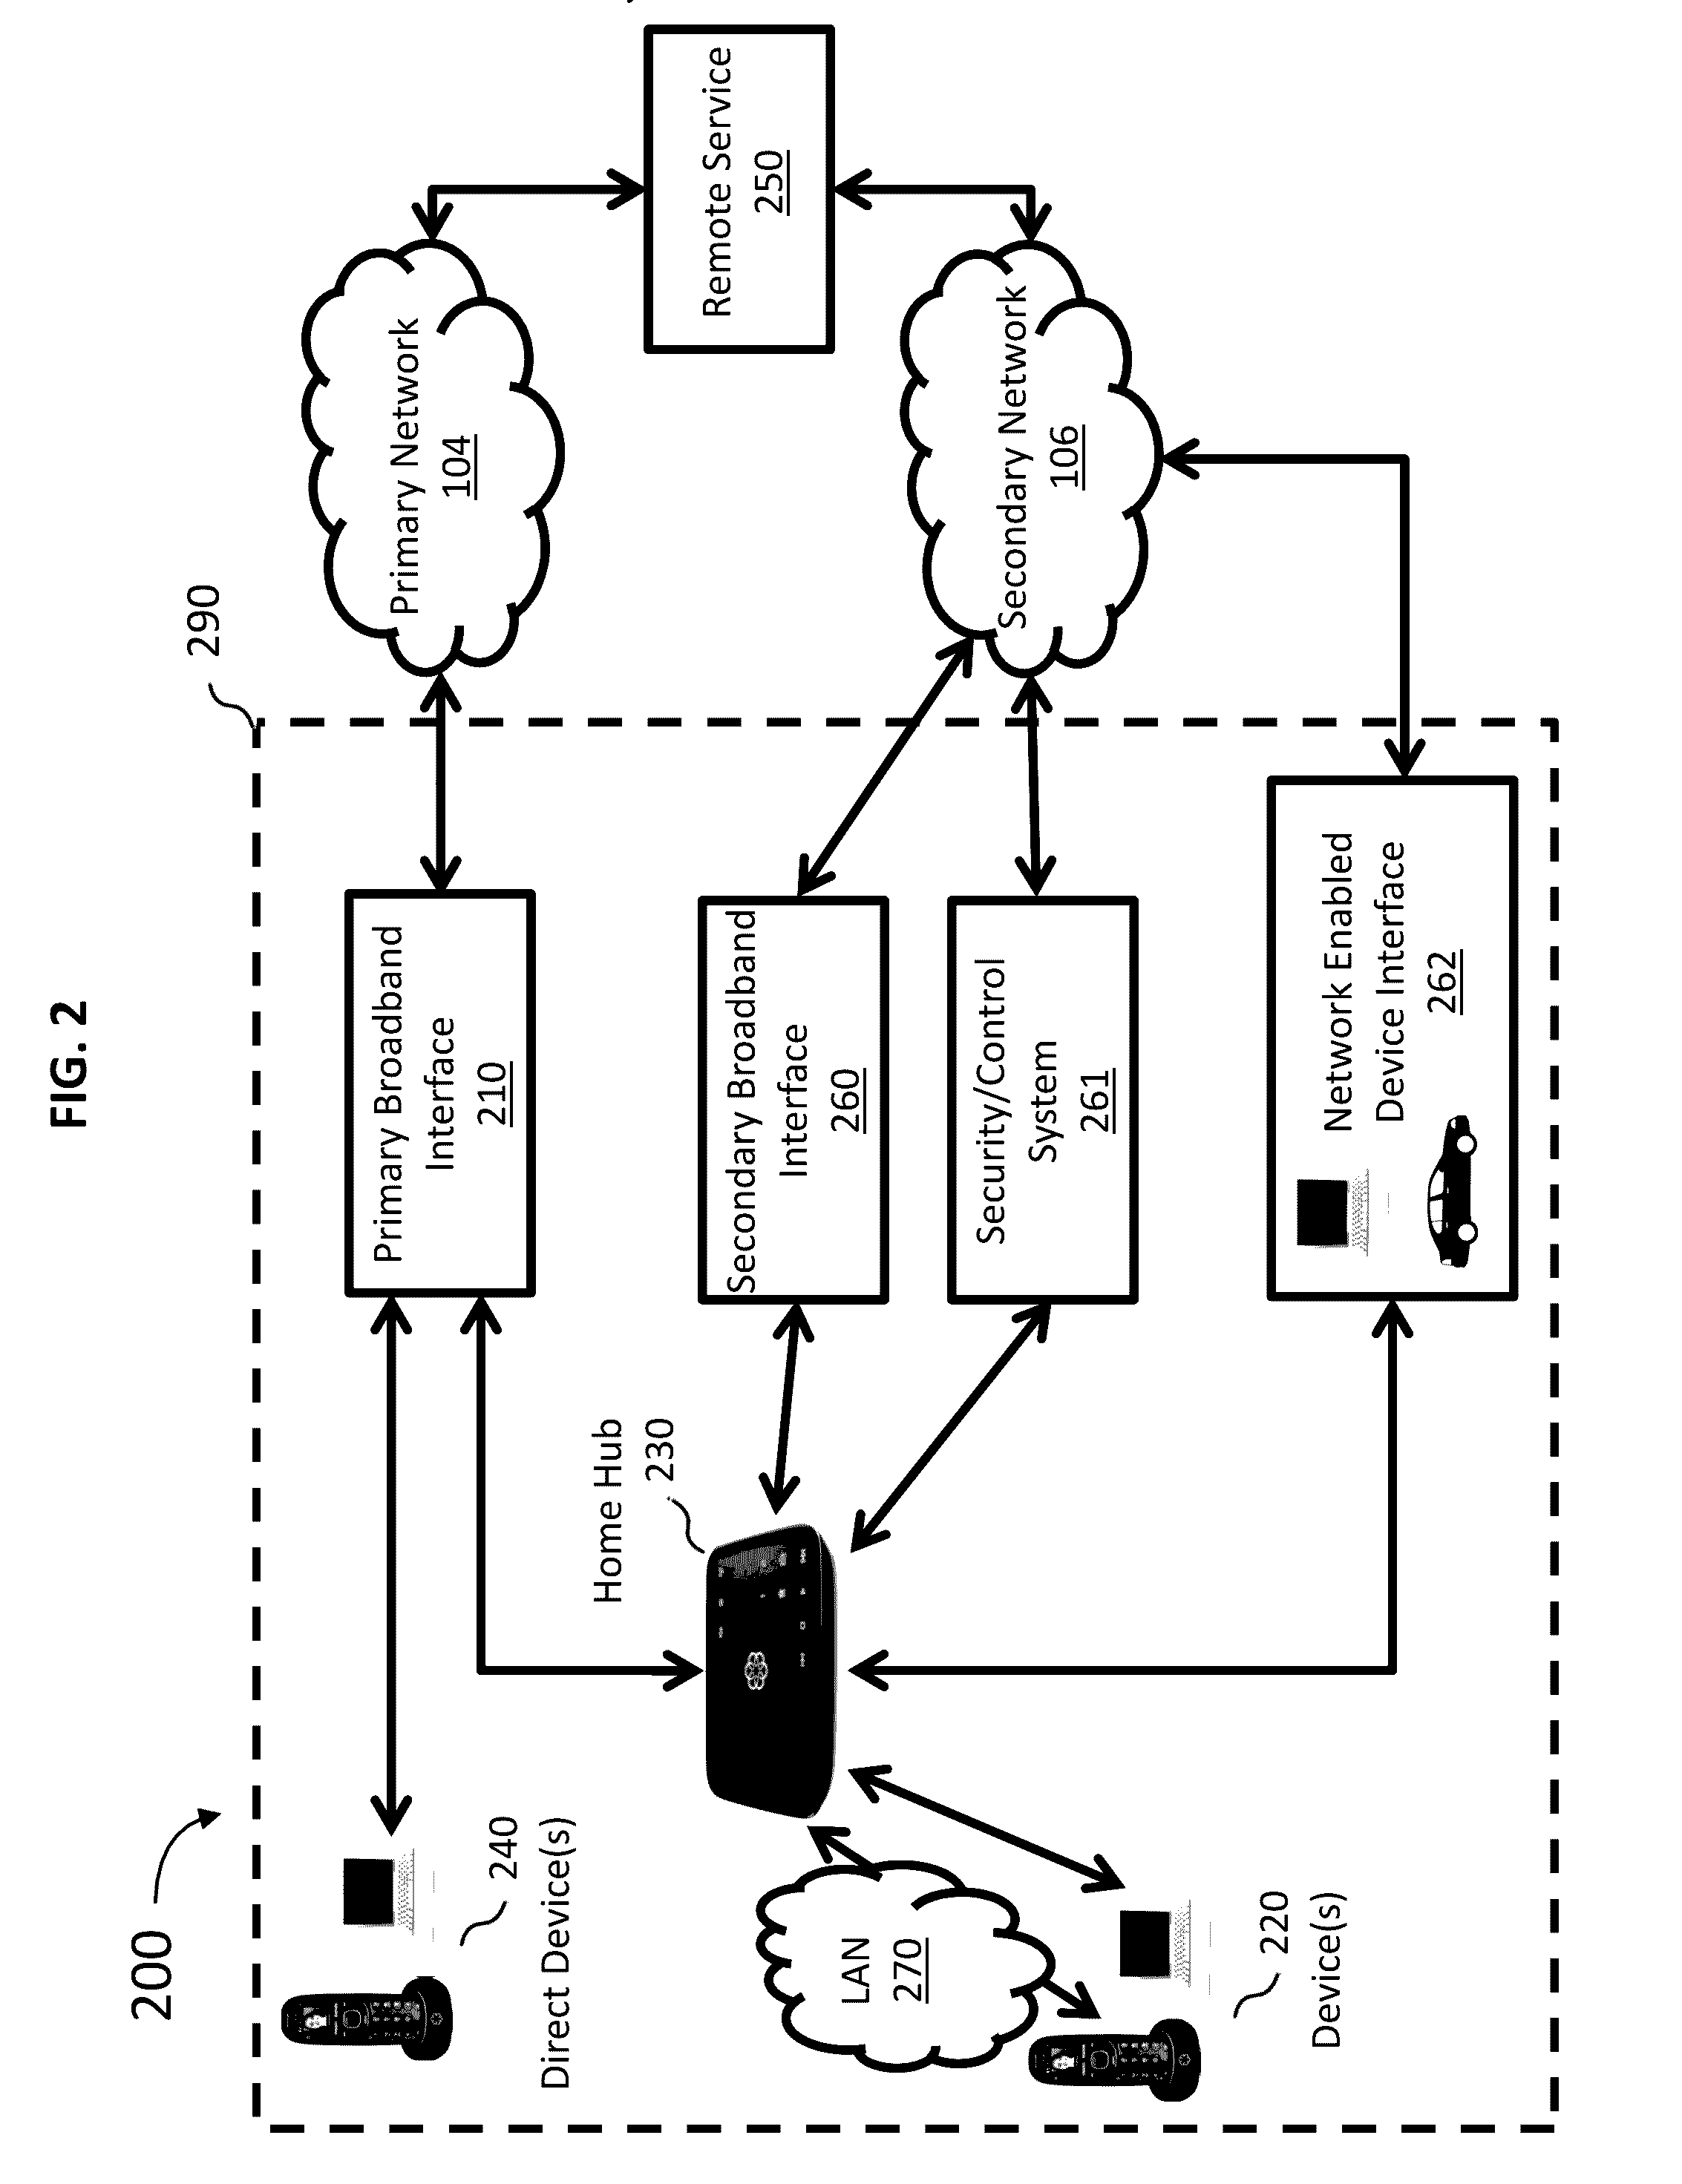 Establishing and Managing Alternative Networks for High Quality of Service Communications